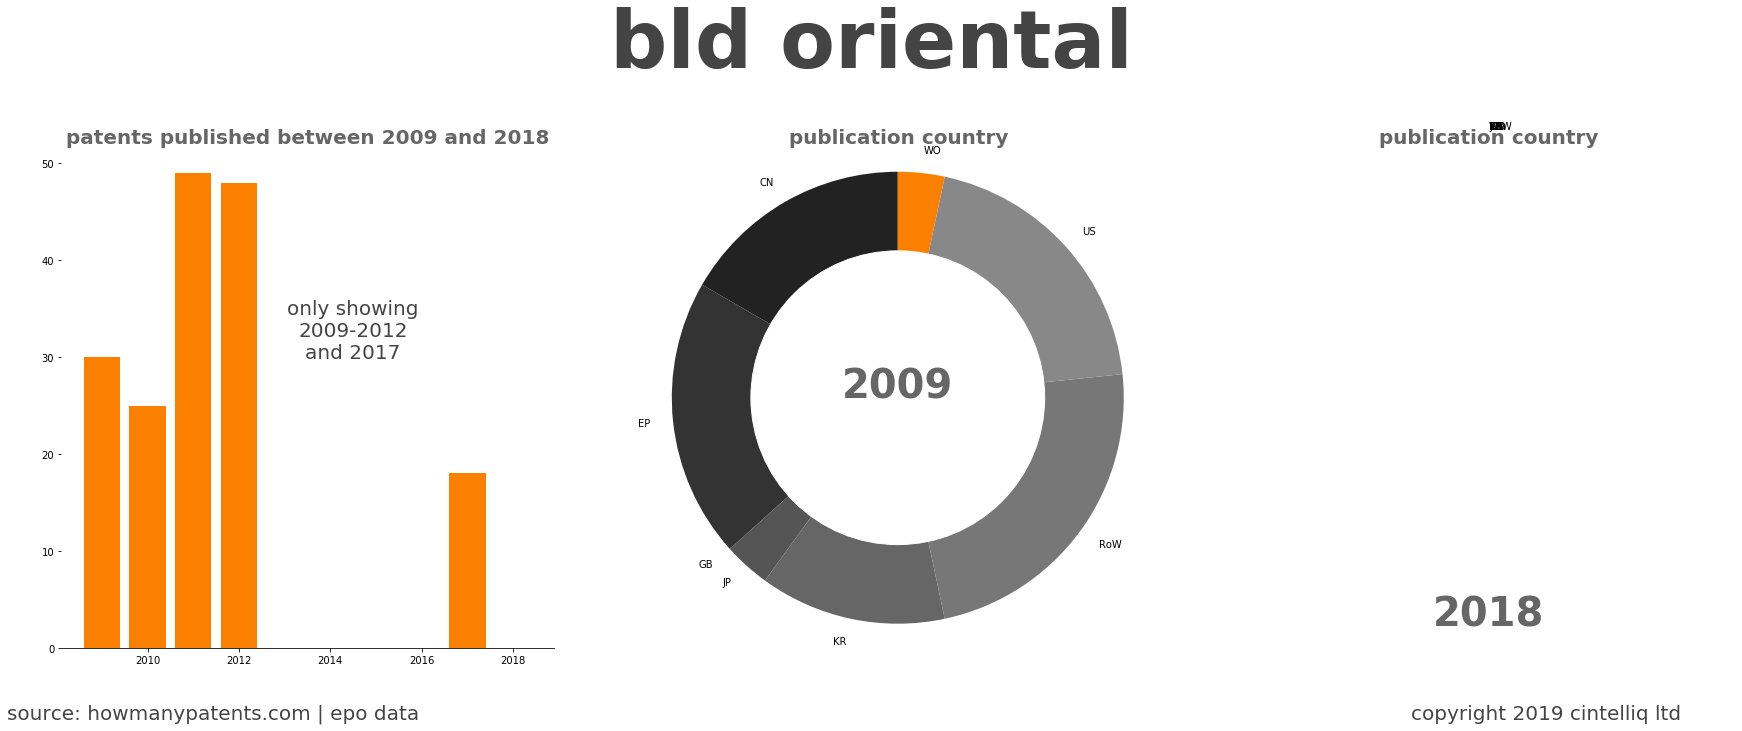 summary of patents for Bld Oriental